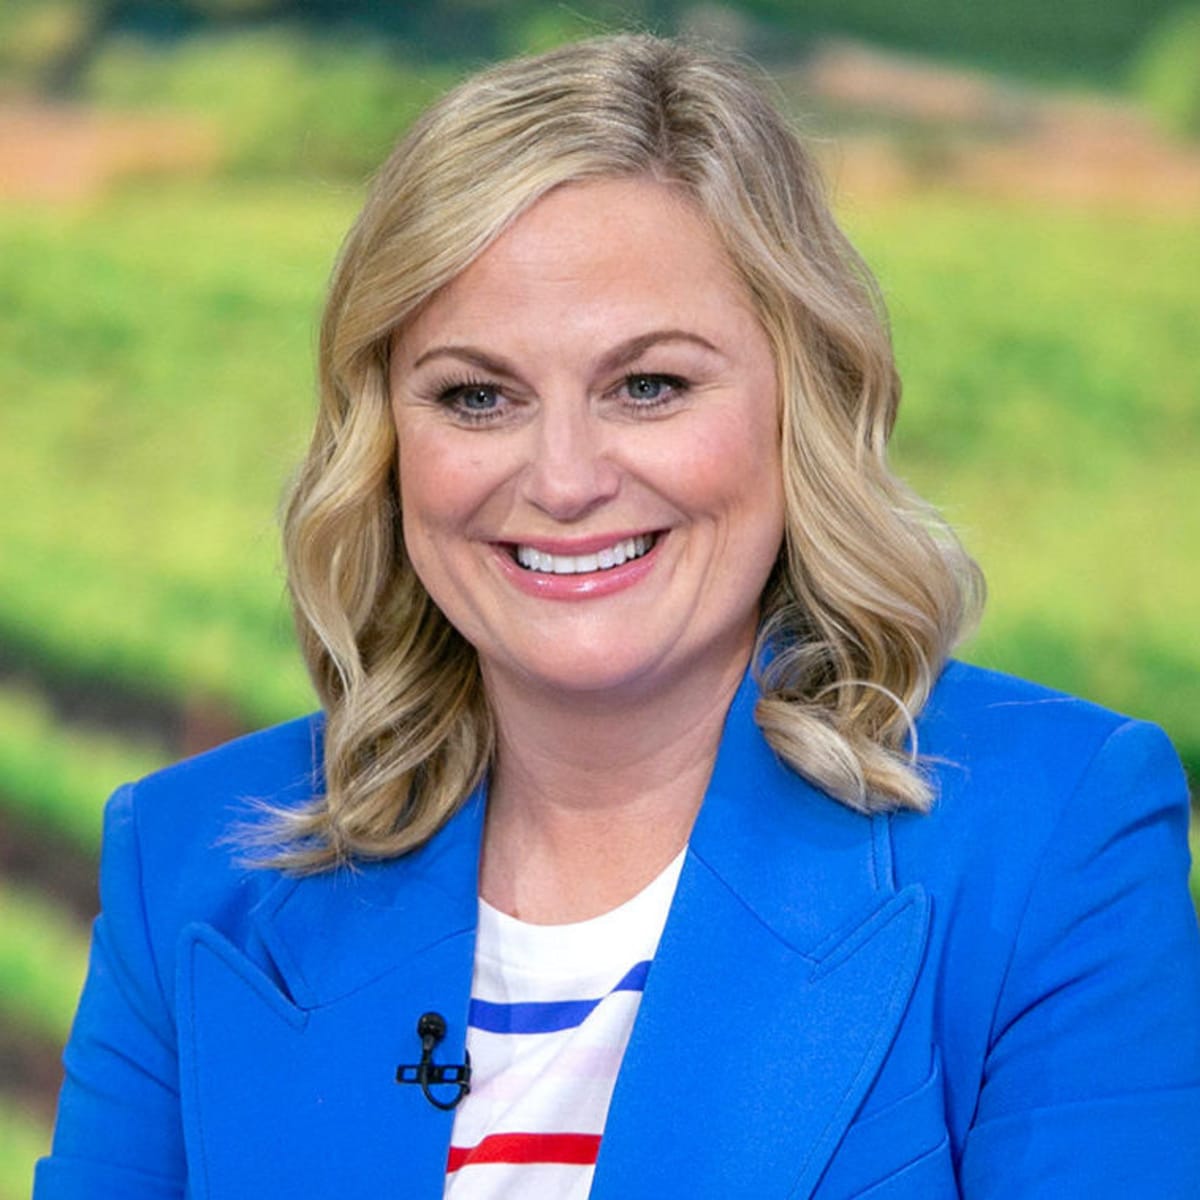 Amy Poehler in a blue blazer during an interview